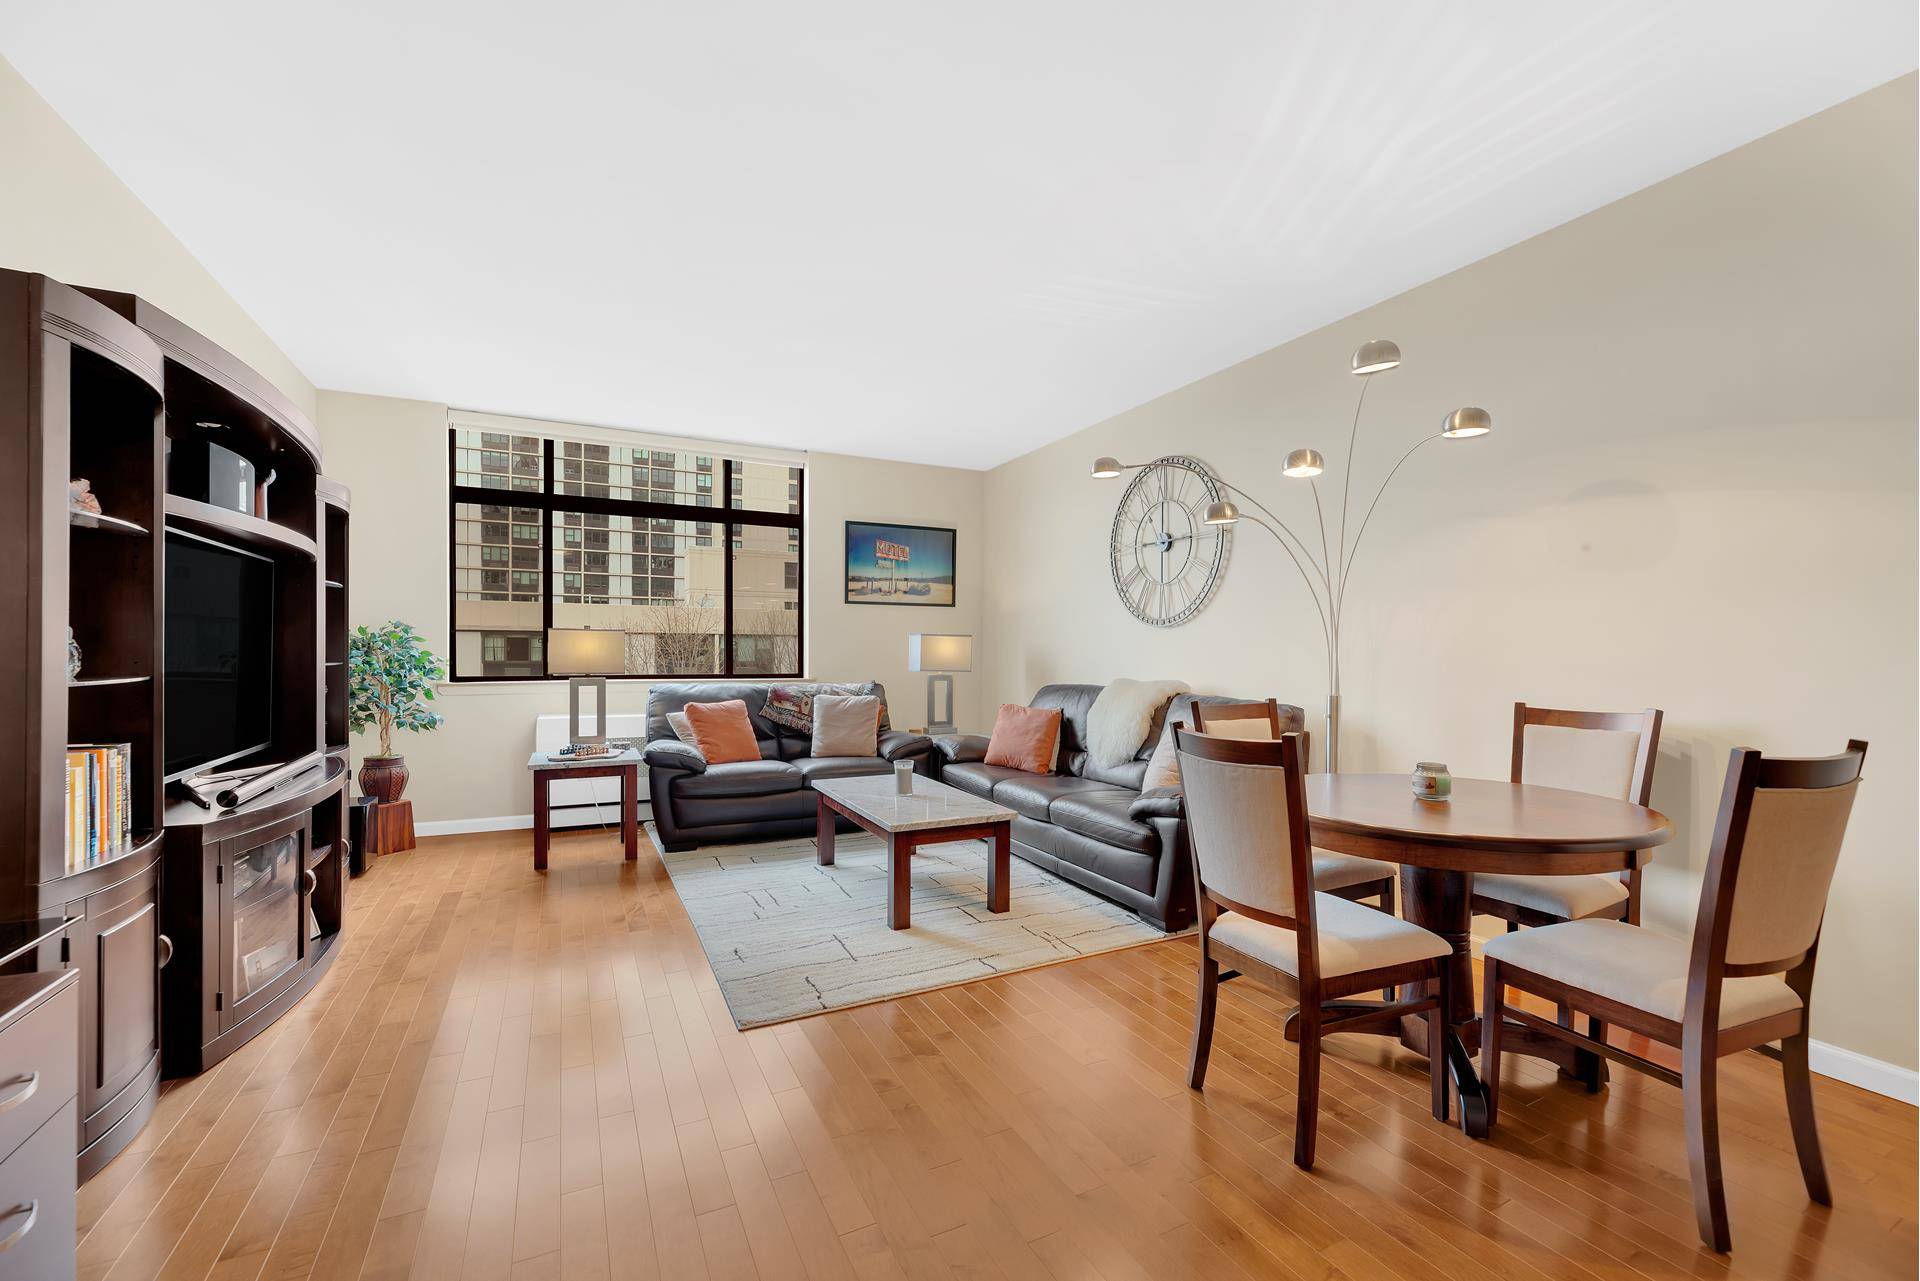 What's not to love about this gorgeous, completely renovated one bedroom apartment at the coveted Hudson Tower condominium !